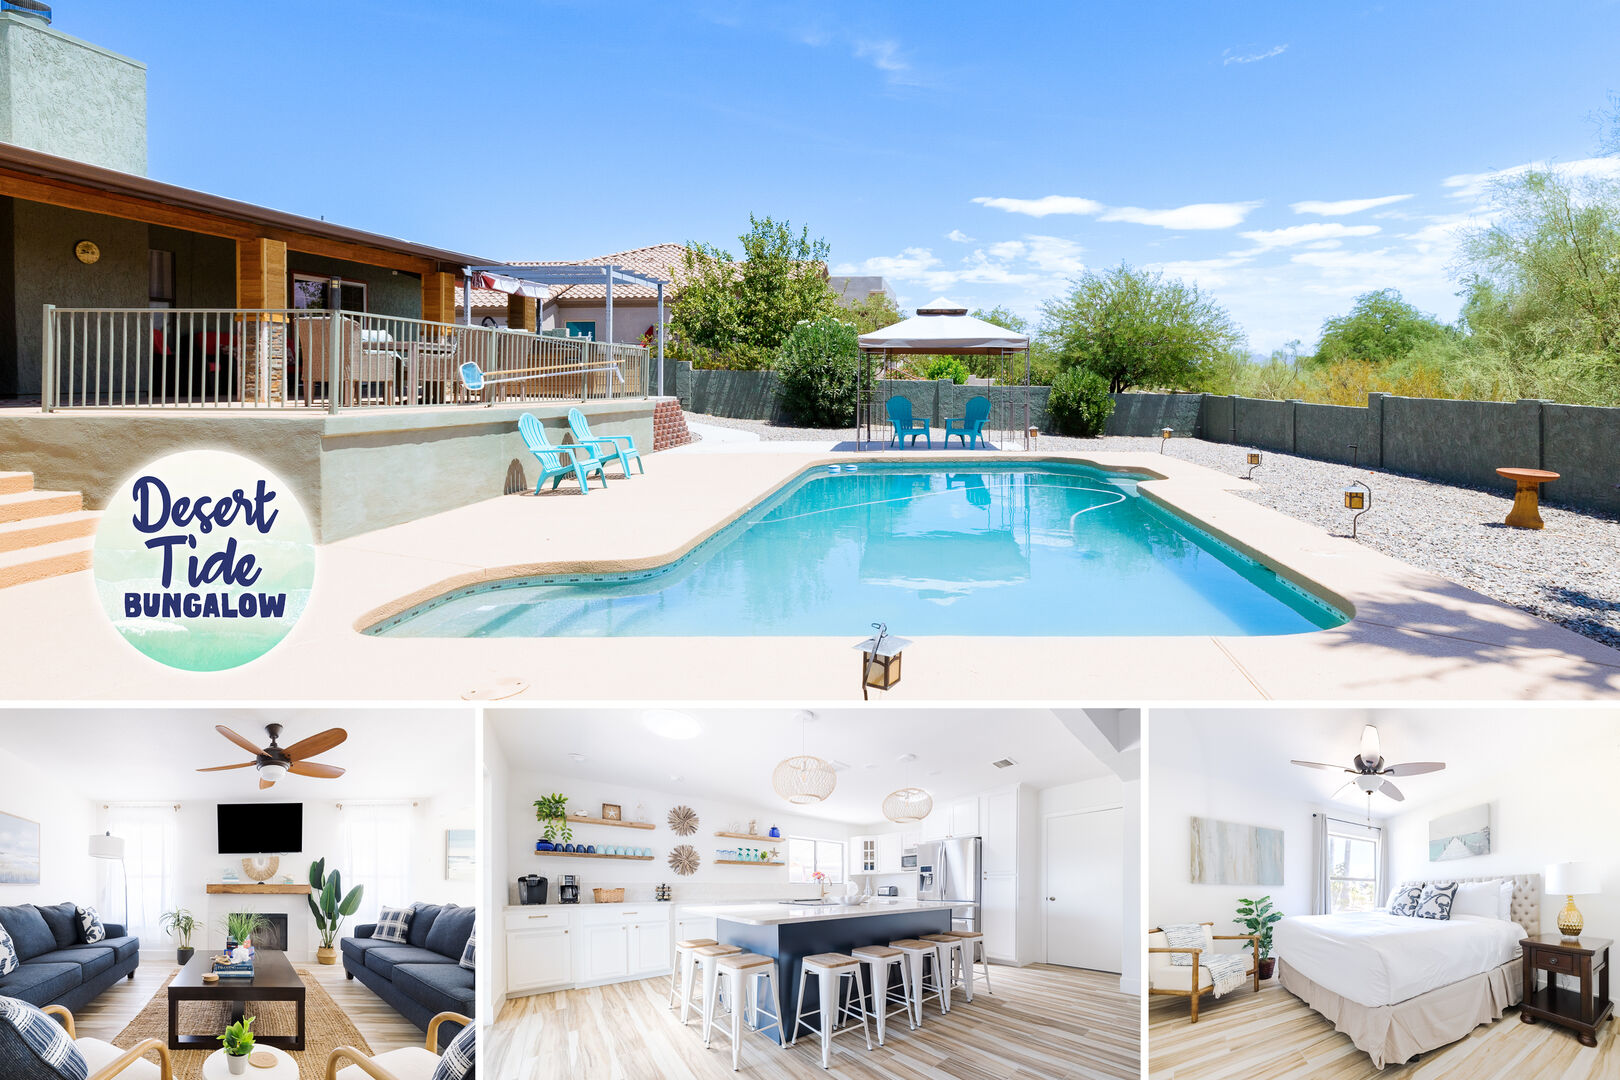 STUNNING MODERN FARMHOUSE STYLE HOME IN FOUNTAIN HILLS. FEATURES PRIVATE POOL, SPA, & MULTIPLE GAMES!